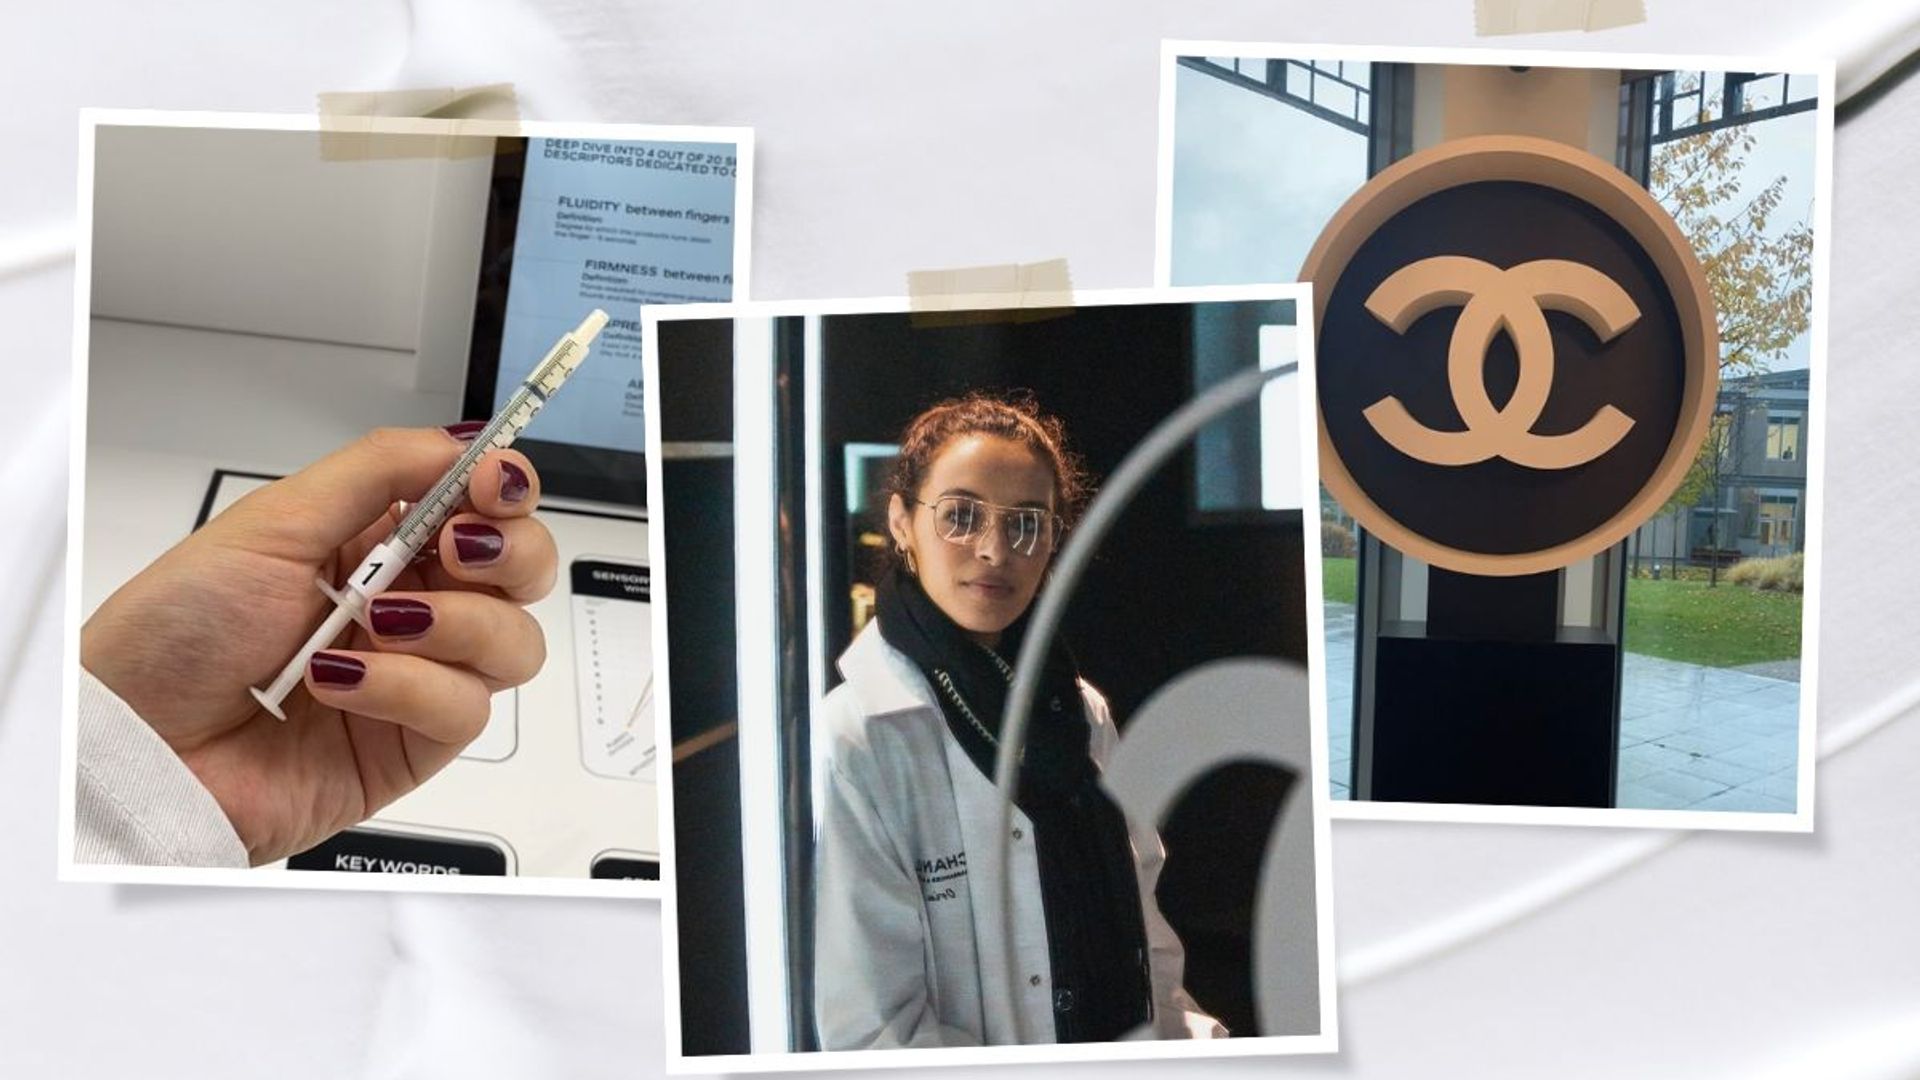 Syringe, beauty journalist Orin Carlin in a lab coat and Chanel's double C logo 